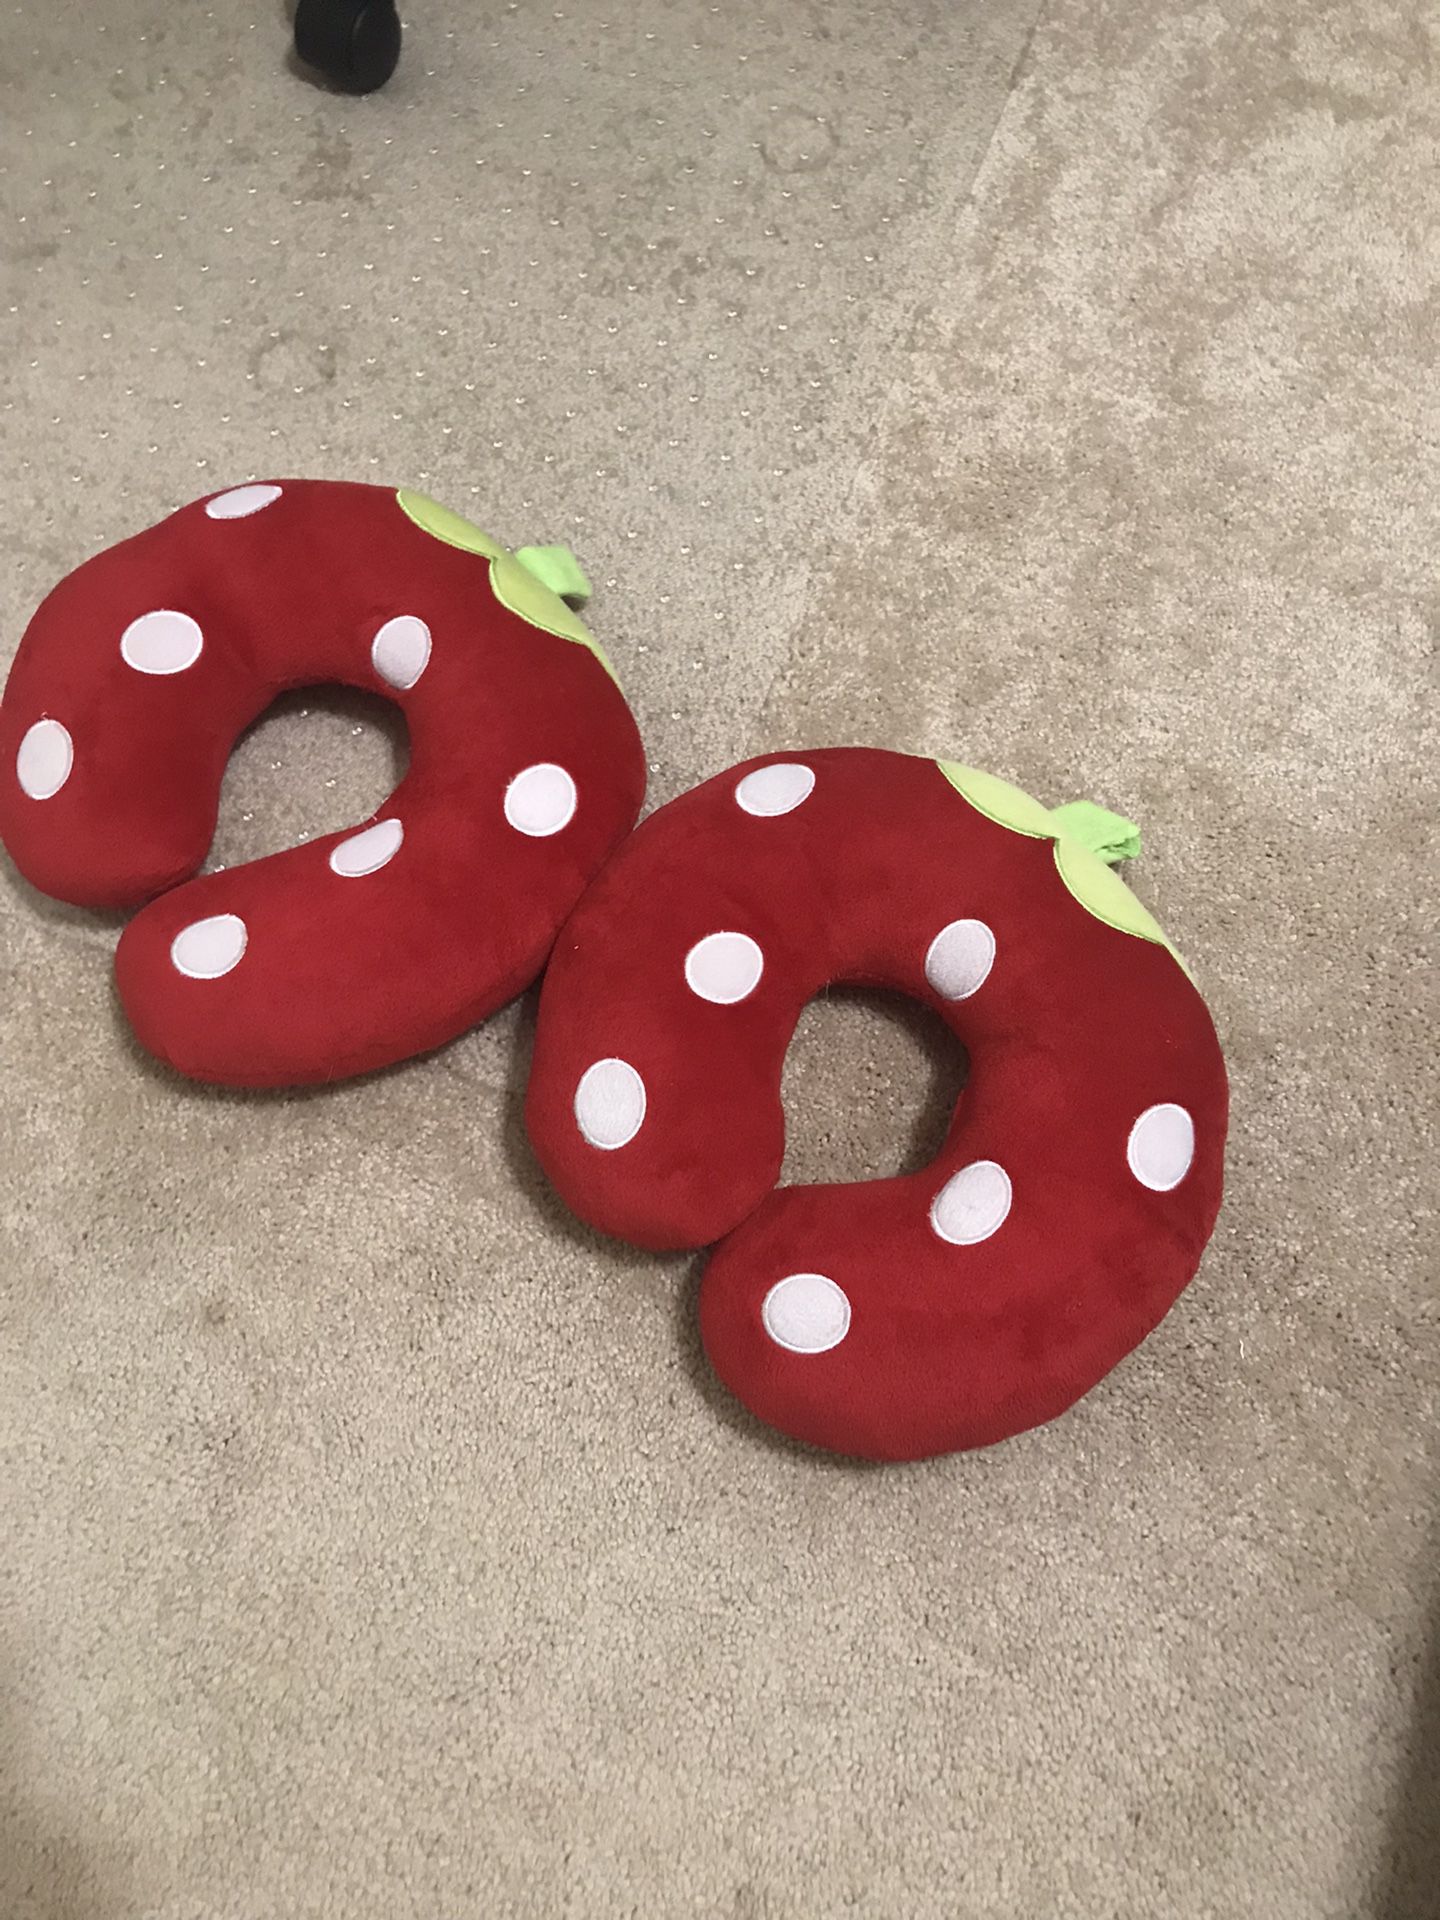 Kids Neck Pillow 2 Pc For $5